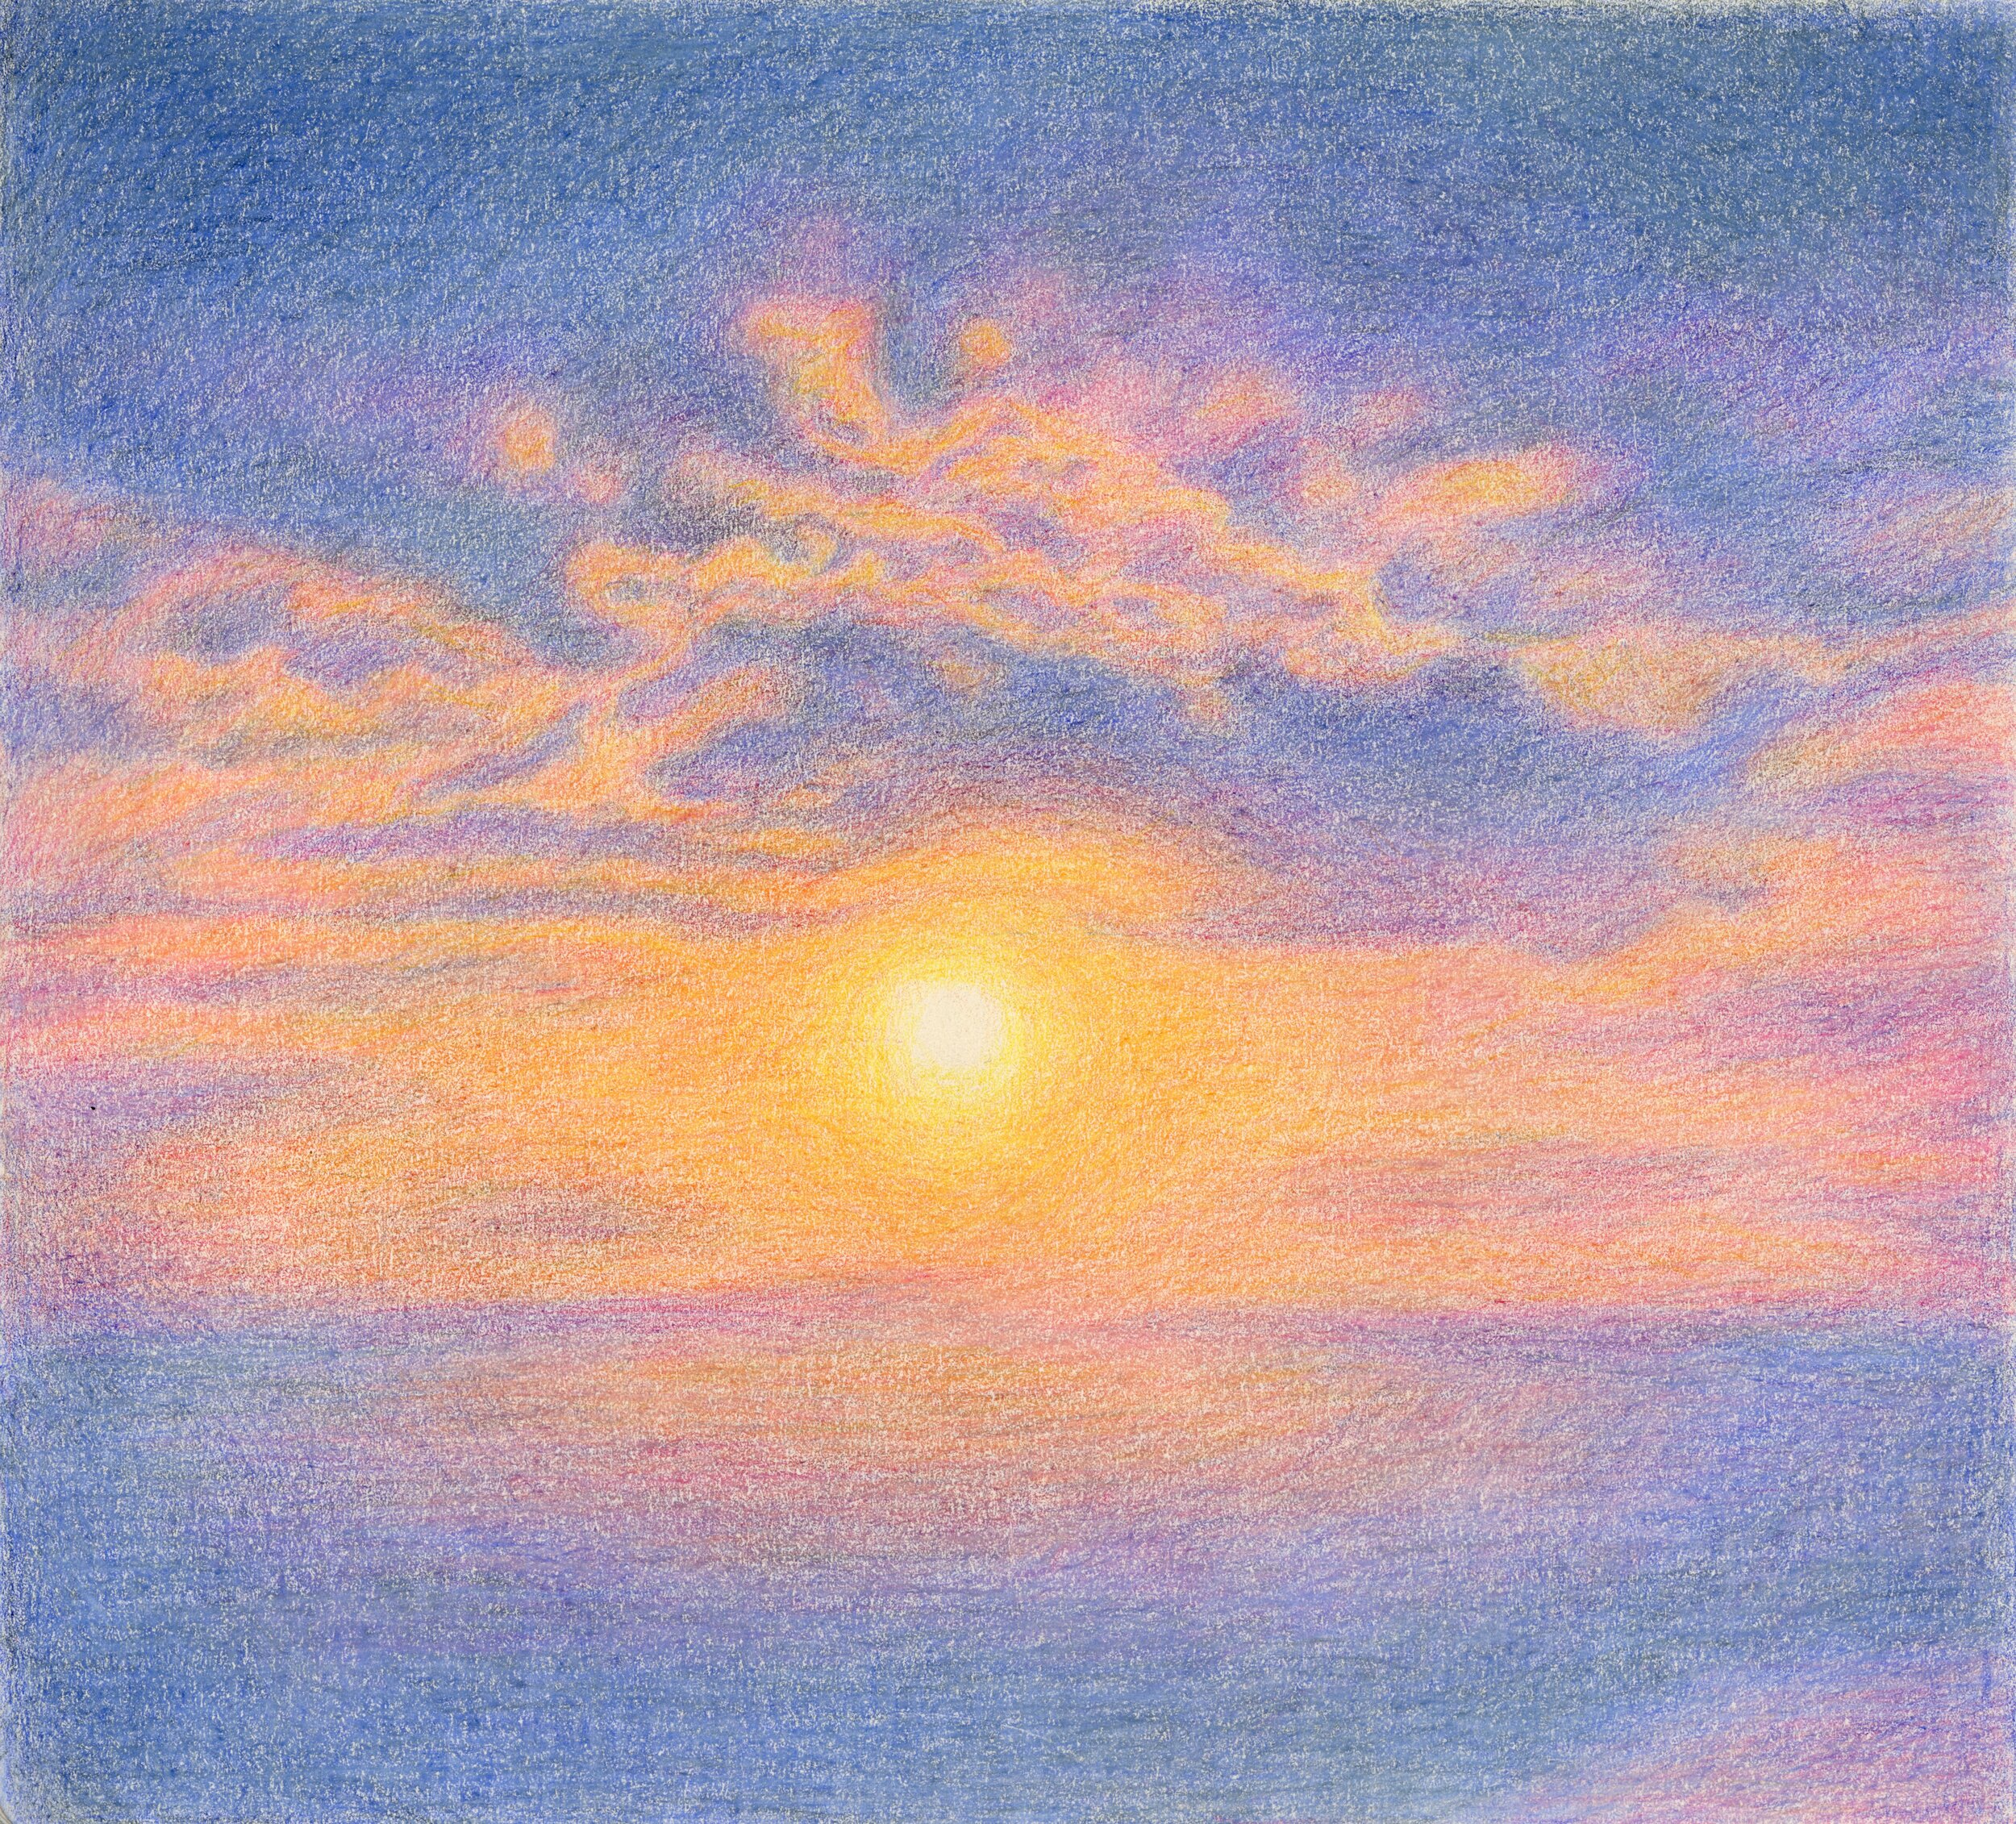    Untitled, 2019  Colored pencil on paper  5.5 in x 6.5 in   